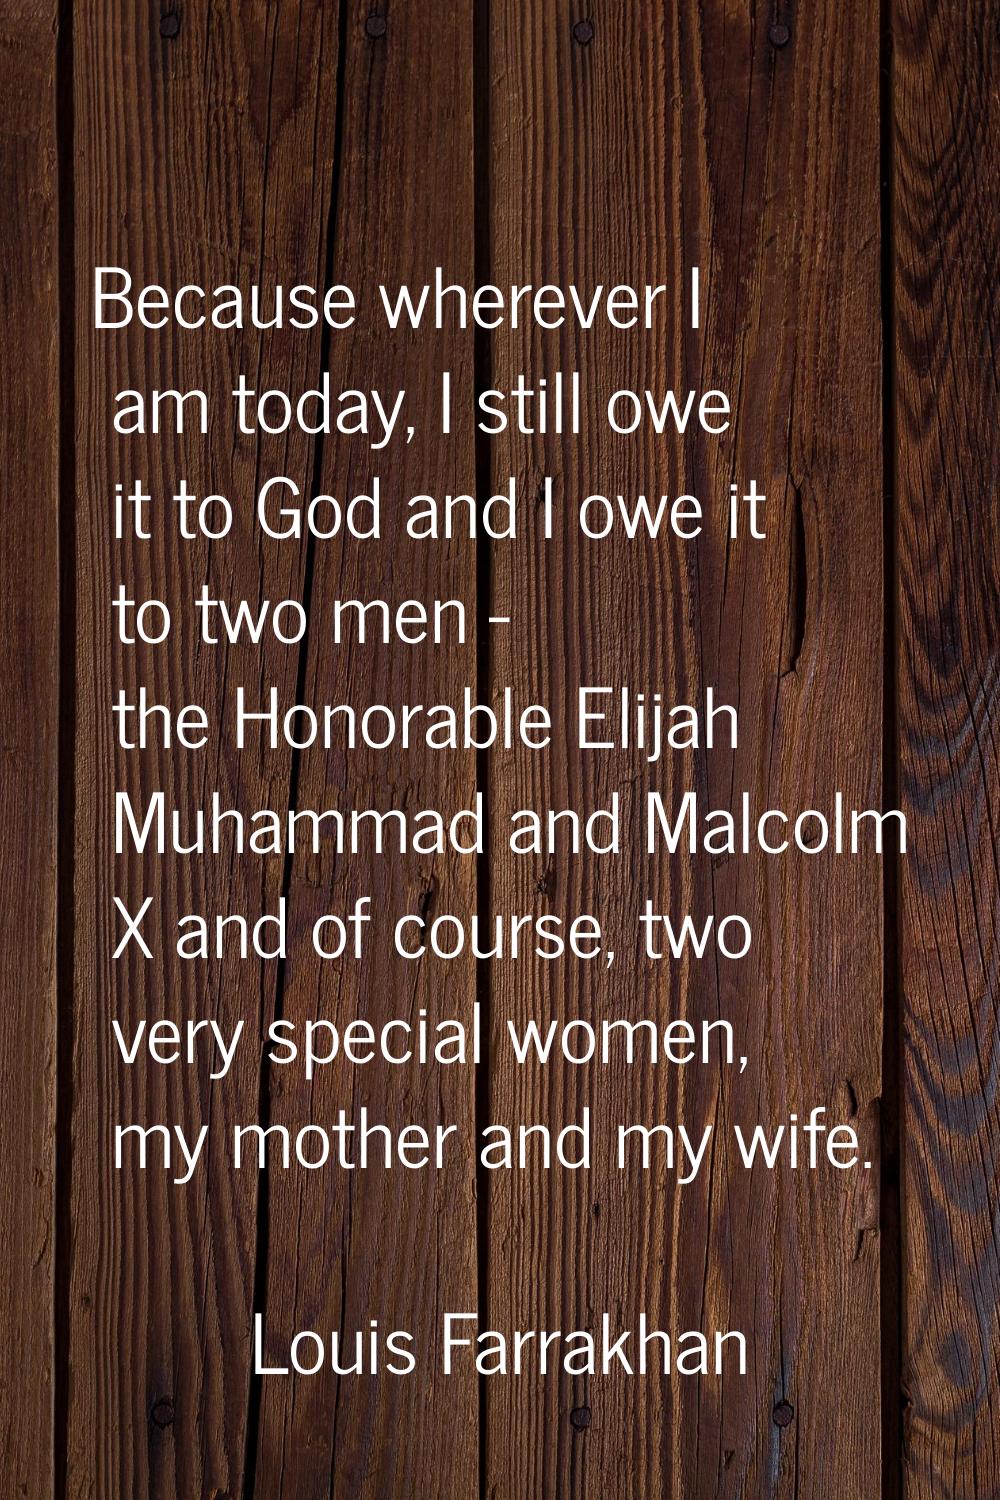 Because wherever I am today, I still owe it to God and I owe it to two men - the Honorable Elijah M